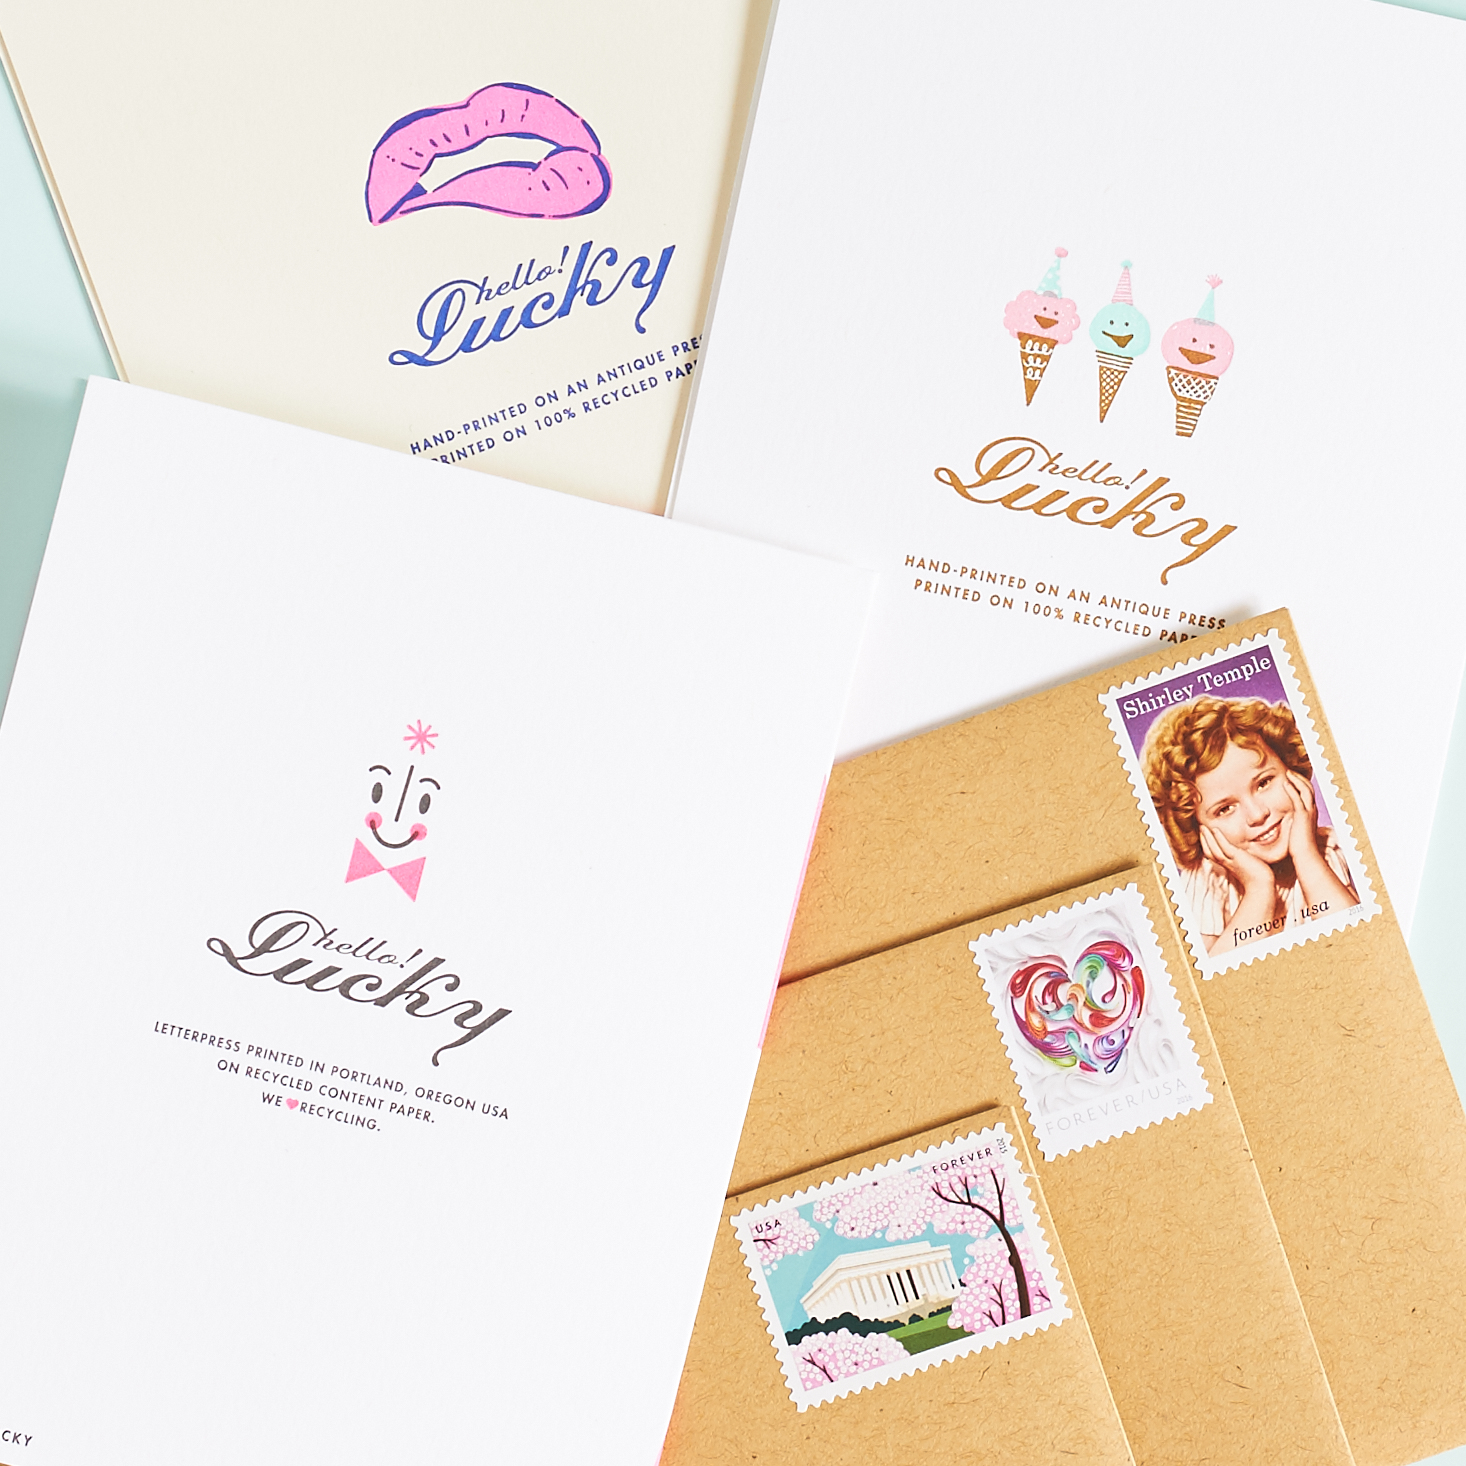 Meet Hello!Lucky, a cute indie greeting card subscription!